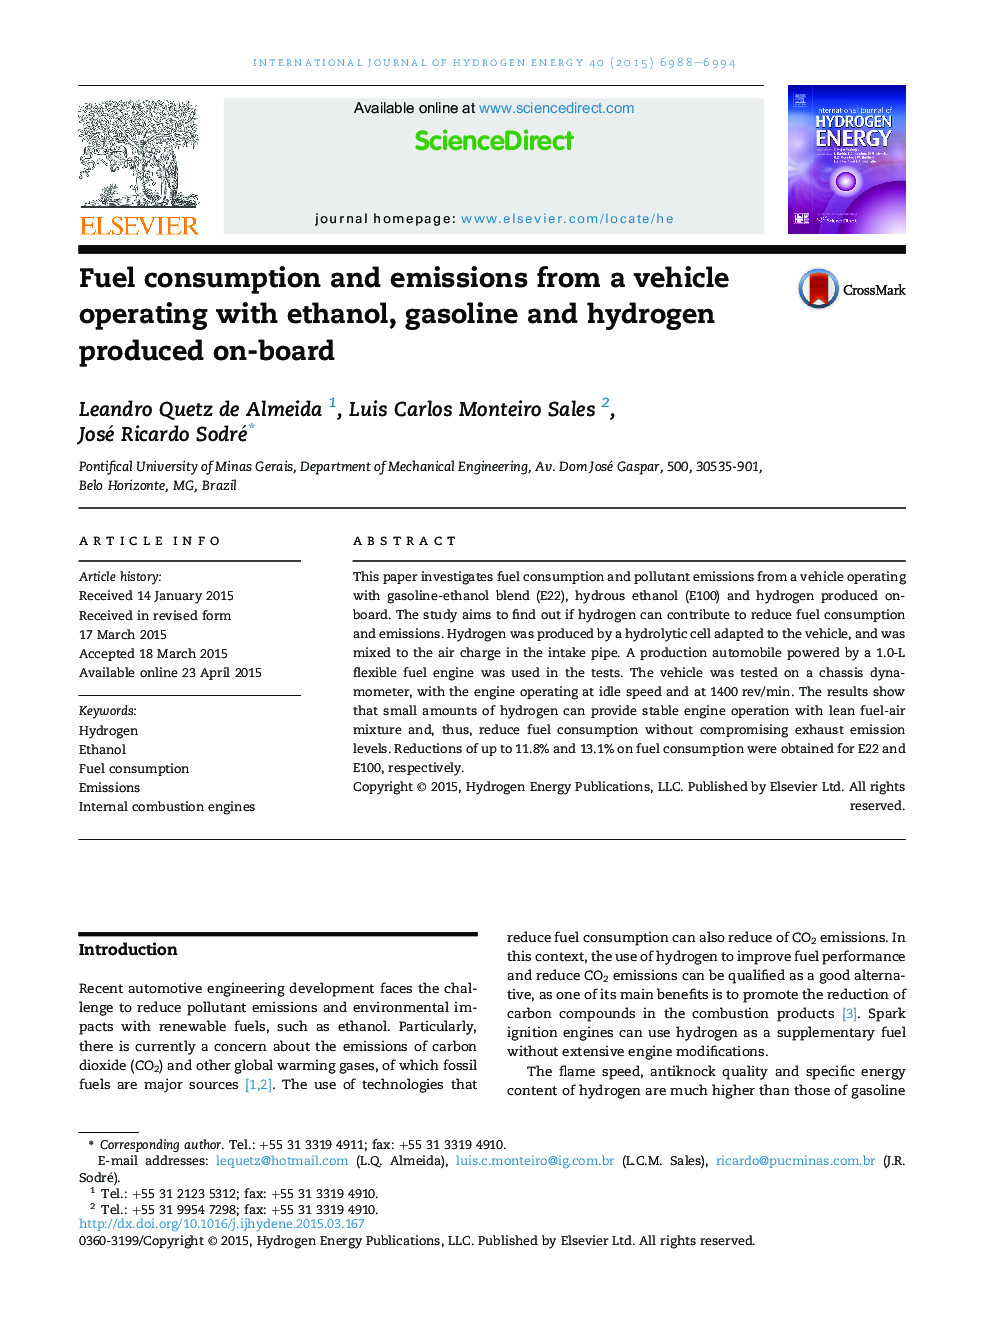 Fuel consumption and emissions from a vehicle operating with ethanol, gasoline and hydrogen produced on-board